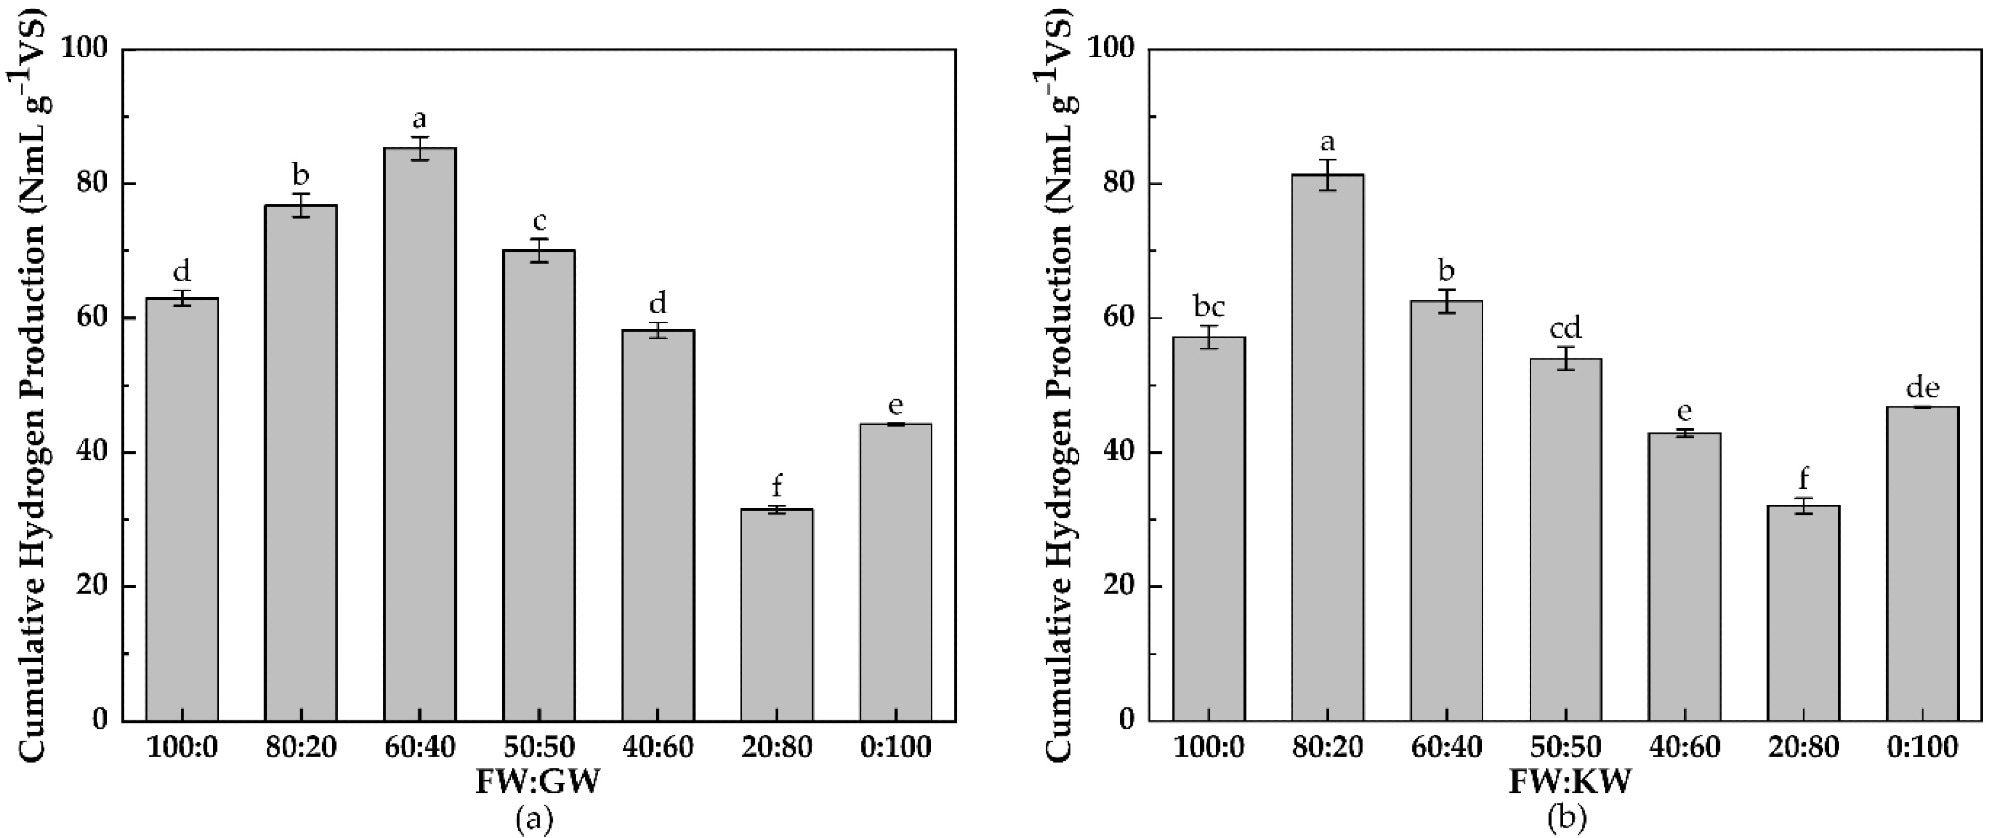 Cumulative hydrogen production on the 30th day for the thermophilic dry anaerobic co-fermentation of (a) FW + GW and (b) FW + KW. Letters indicate significant differences between the different mixing ratios (p < 0.05).